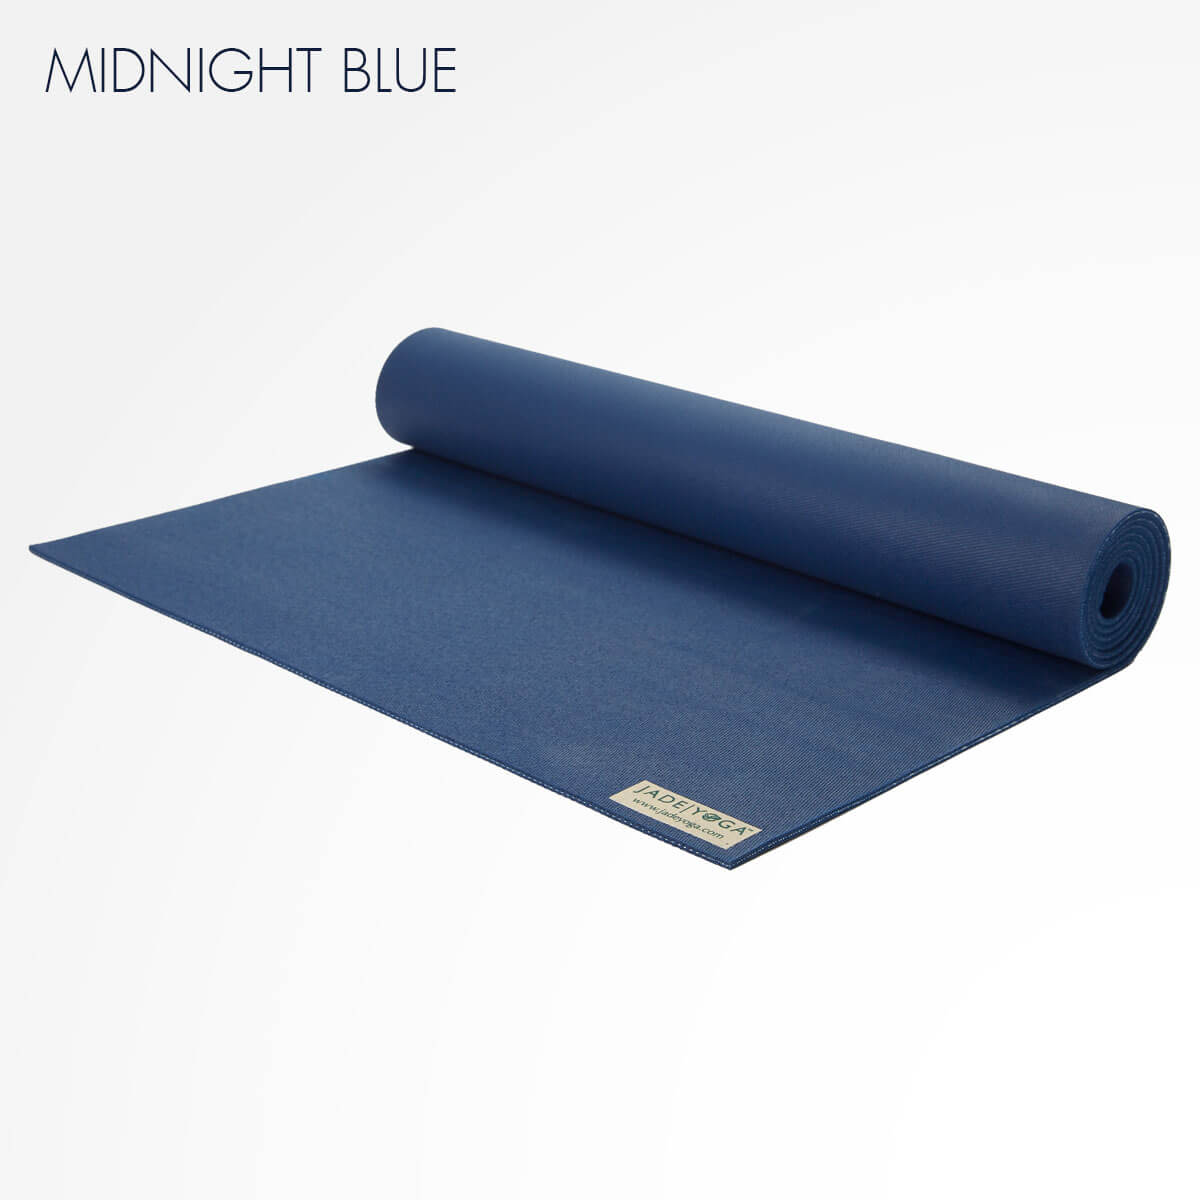 Gaiam Yoga Mat - 6mm Insta-Grip Extra Thick & Dense Textured Non Slip  Exercise Mat for All Types of Yoga & Floor Workouts, 68 L x 24 W x 6mm  Thick, Cove